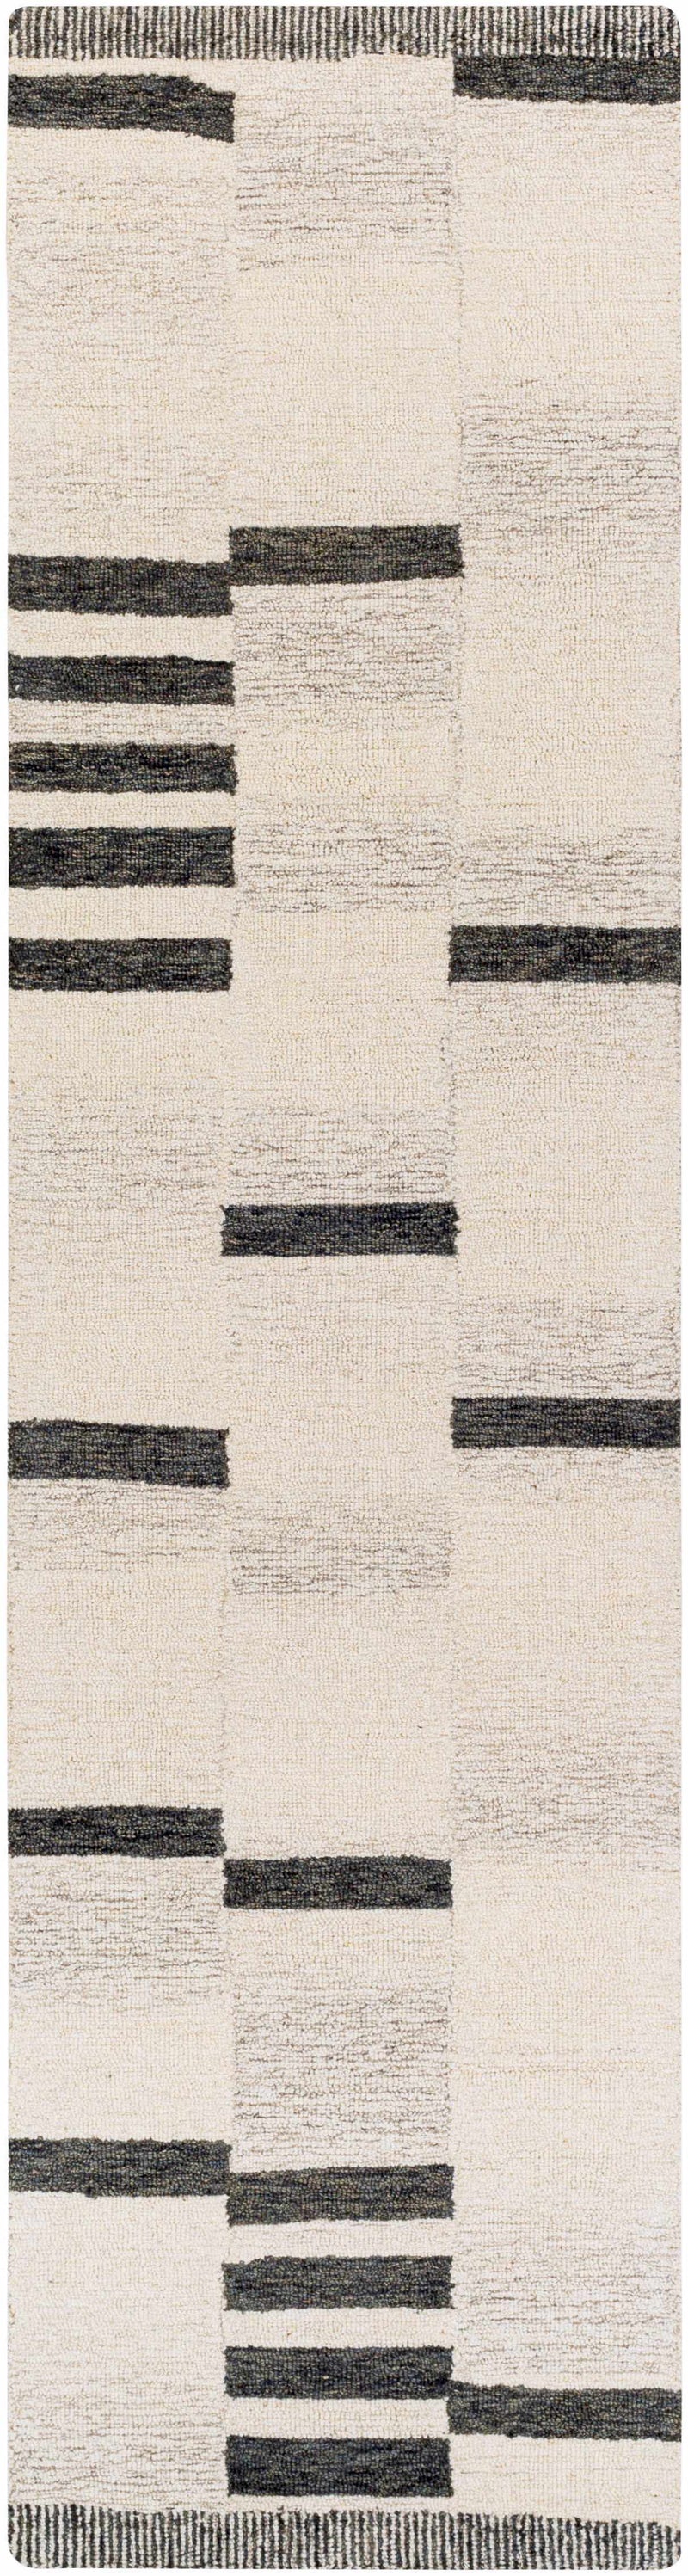 Boutique Rugs - Aibonito Wool Area Rug Rugs Boutique Rugs 2'6" x 10' Runner 